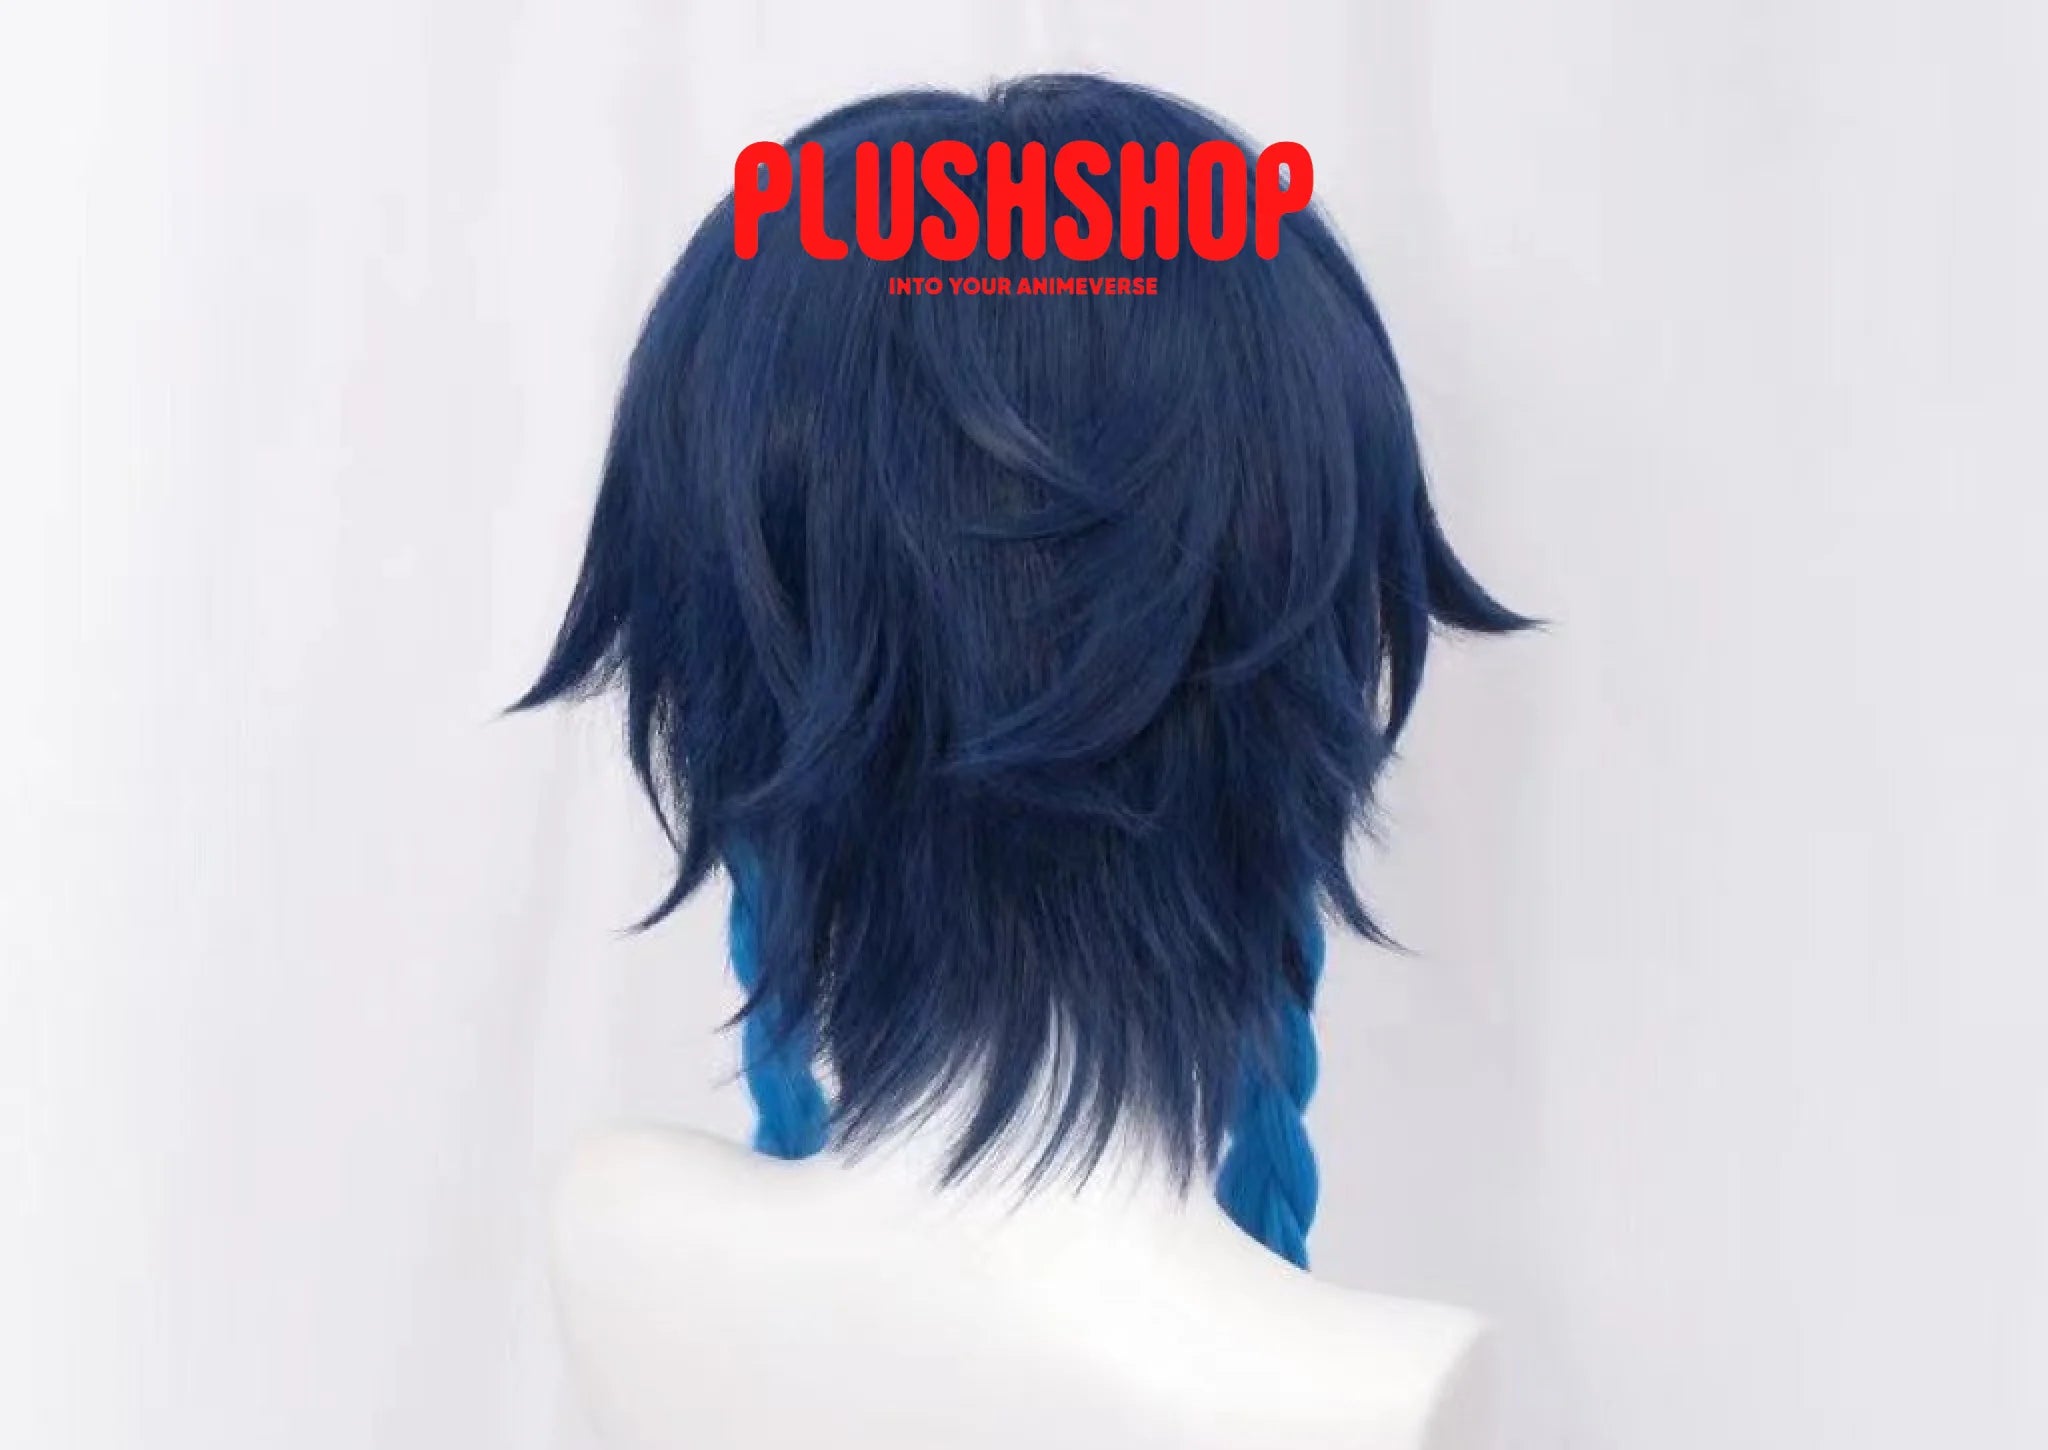 Genshin Impact Venti Cosplay Outfit Costume Wig